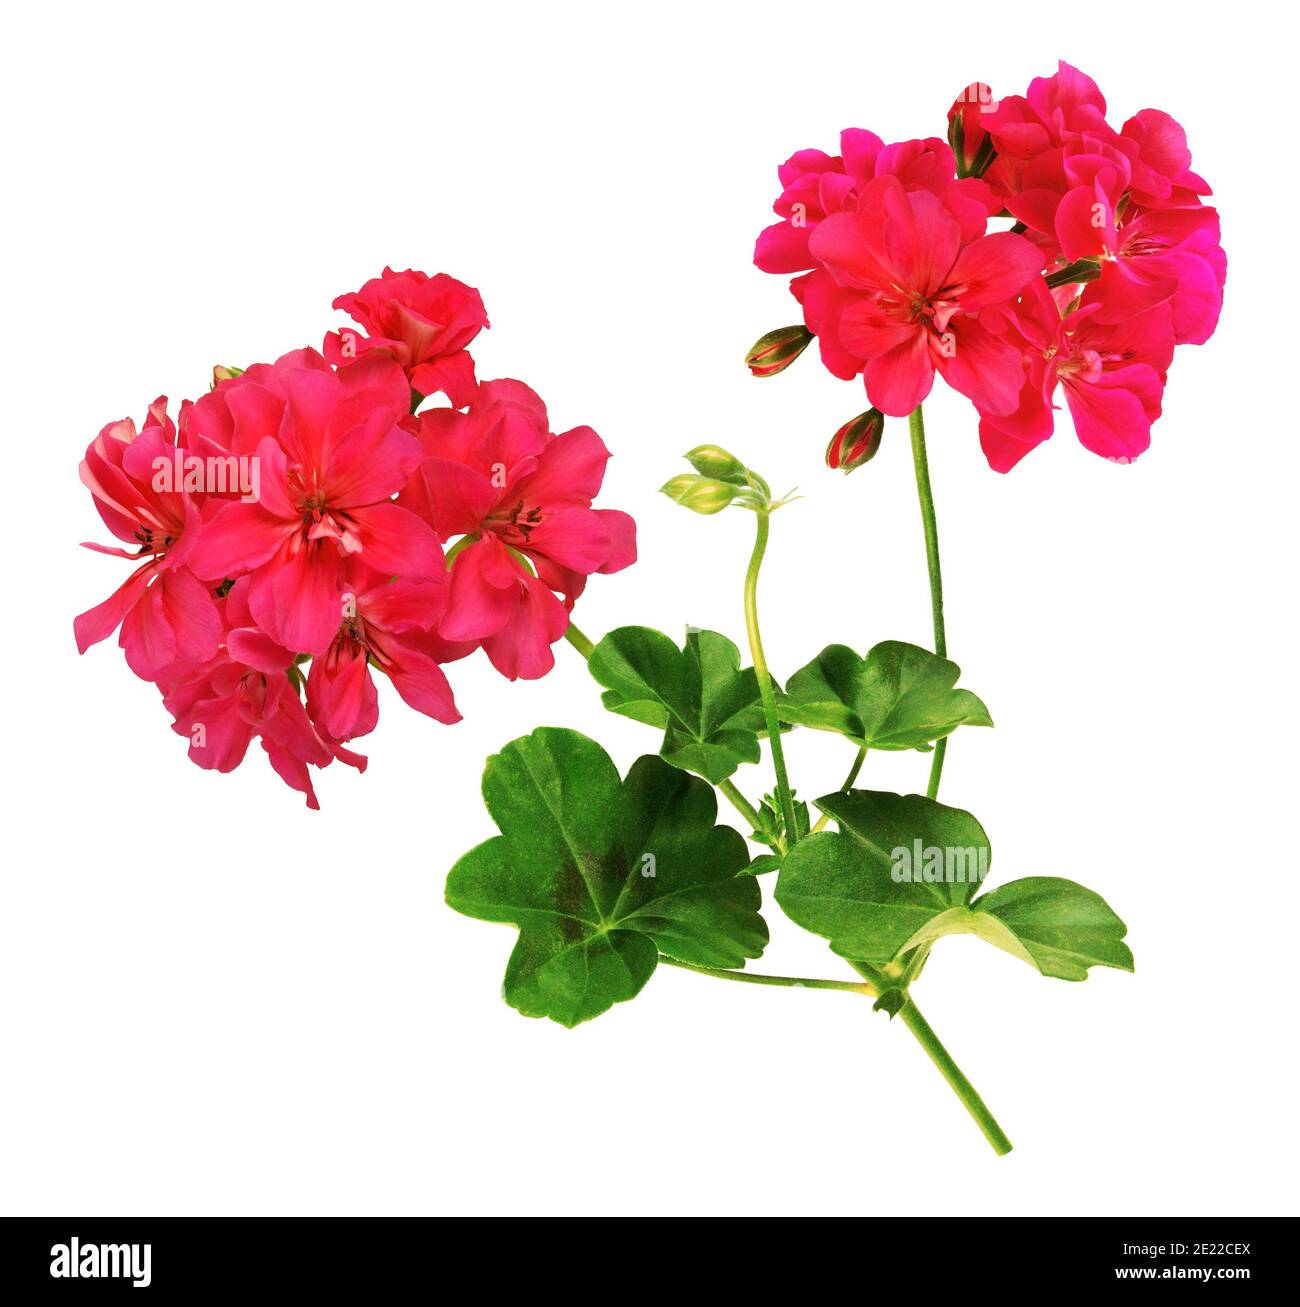 Branch of red geranium, isolated on white background. Stock Photo